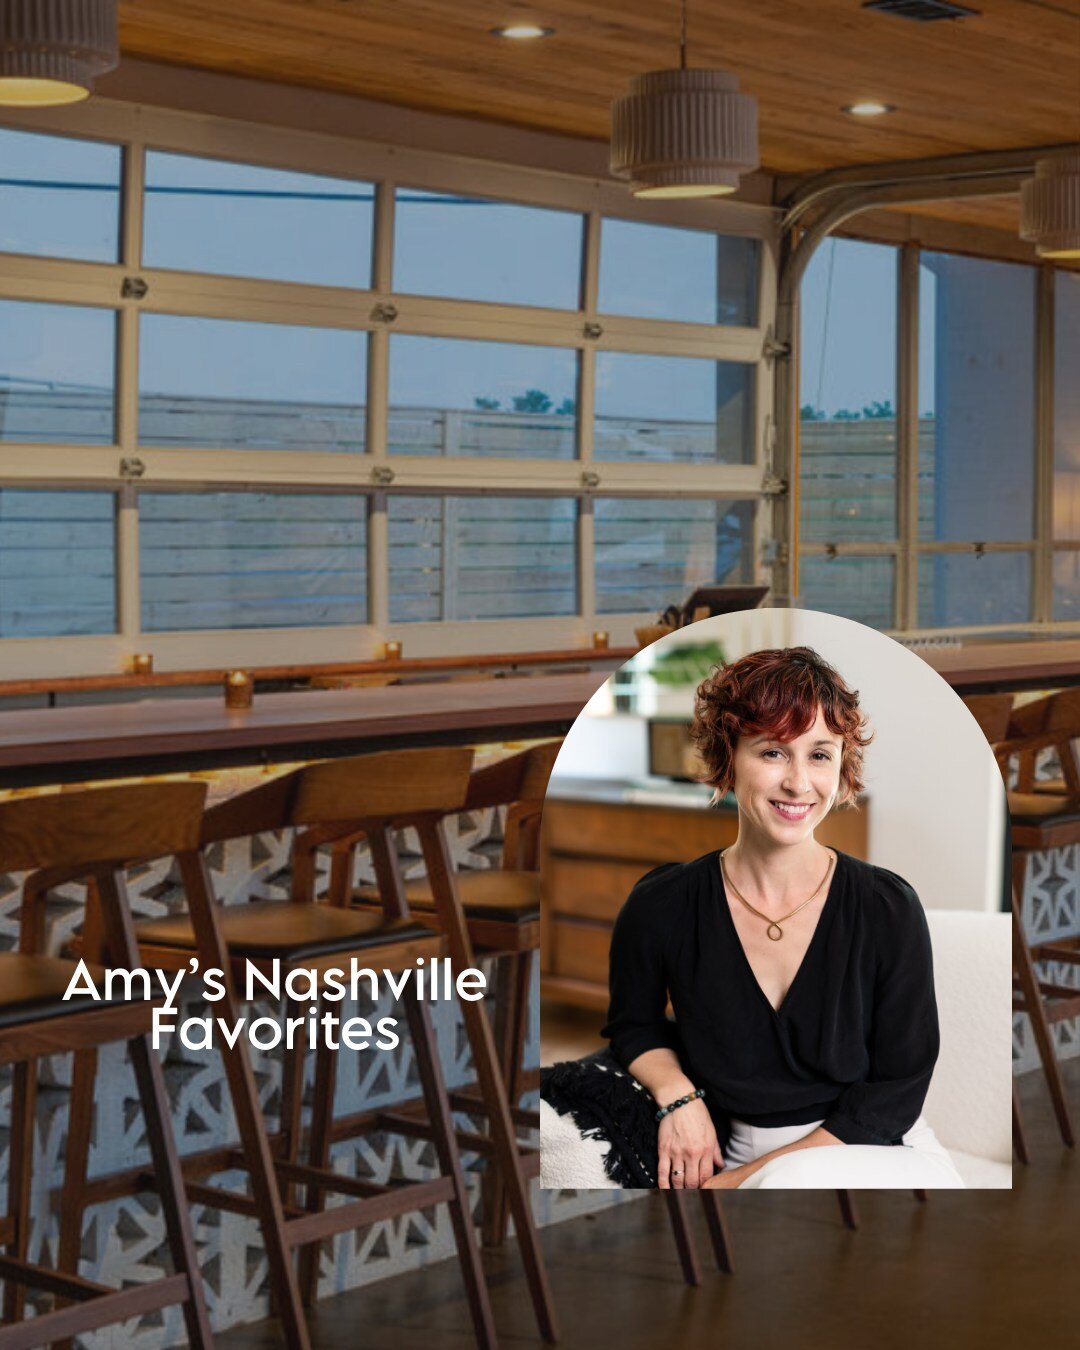 We asked about Amy's local favorites, and here's what she shared with us:

Favorite Gift Shop: Welcome Home Nashville

I can always count on the owners of Welcome Home Nashville to have something fun, interesting or perfectly quirky. Somehow, they&rs